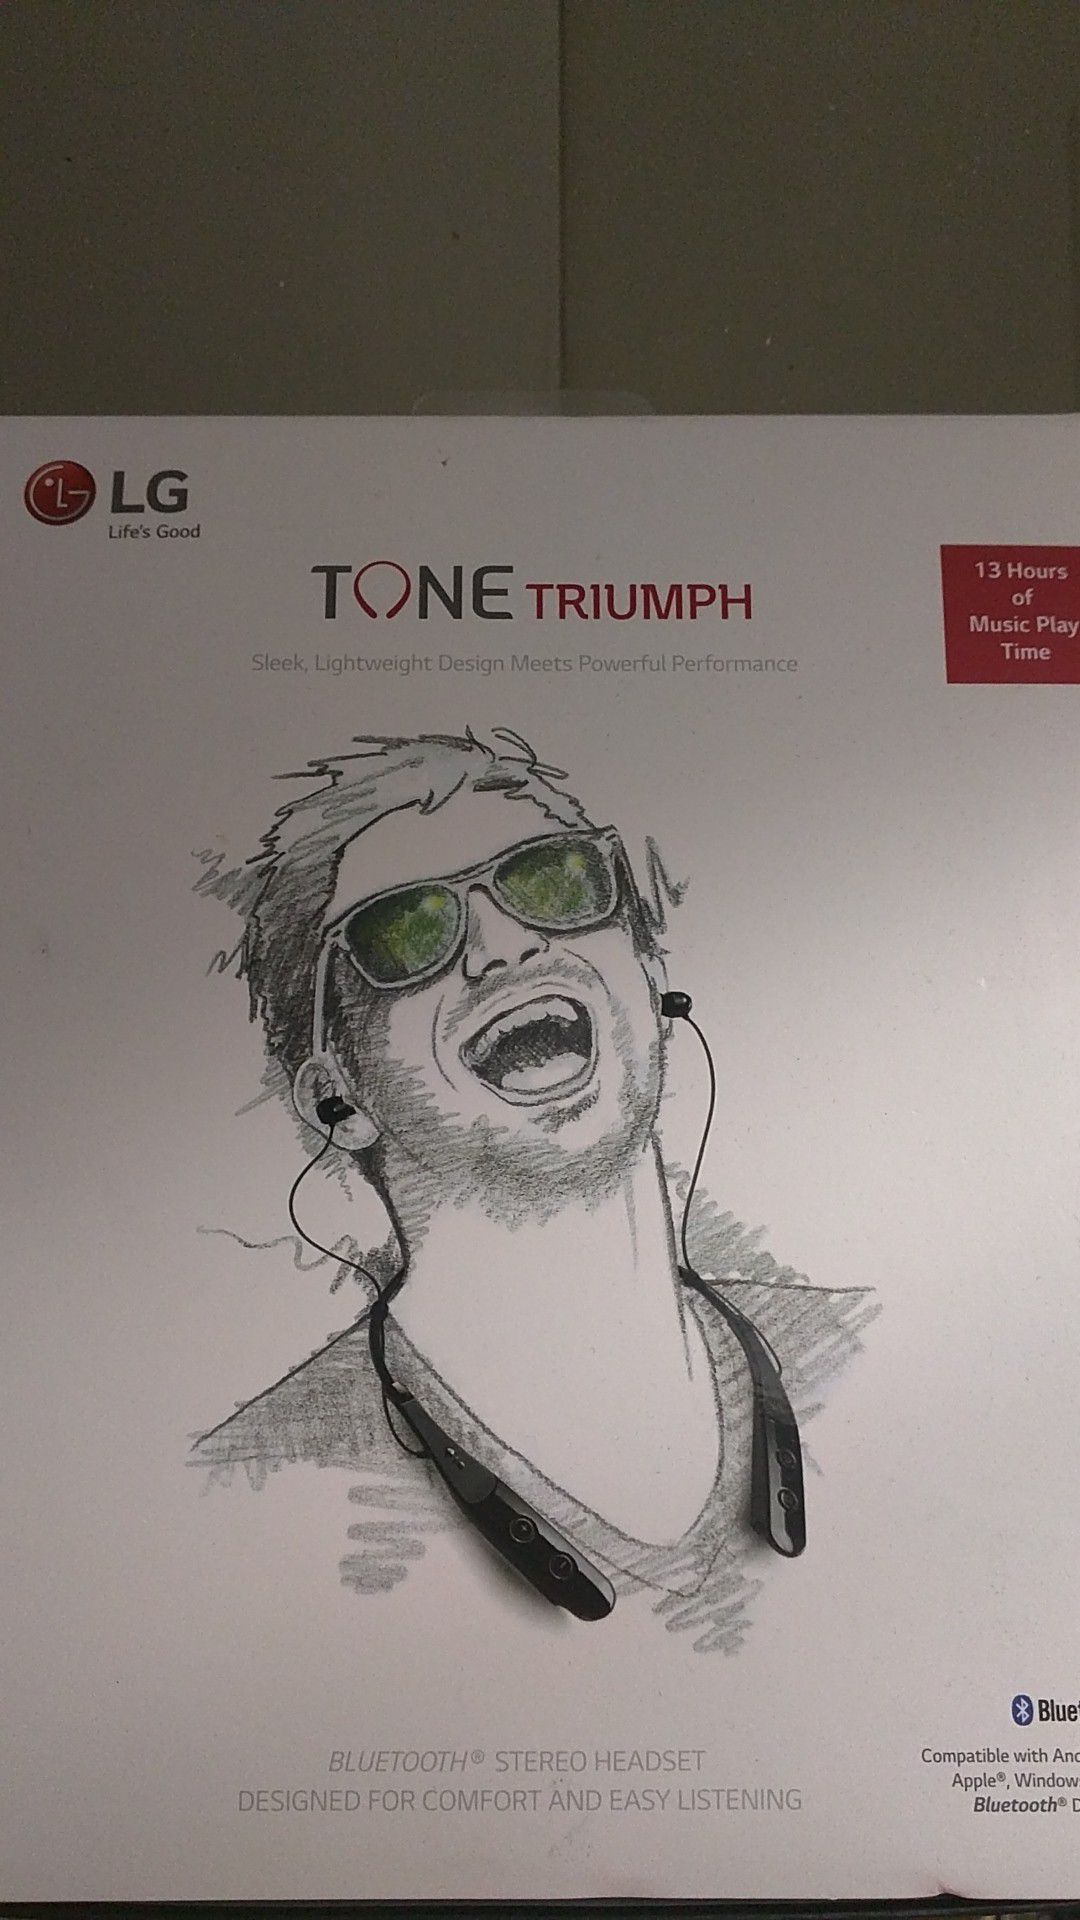 LG tone triumph Bluetooth headset brand new in the box sealed